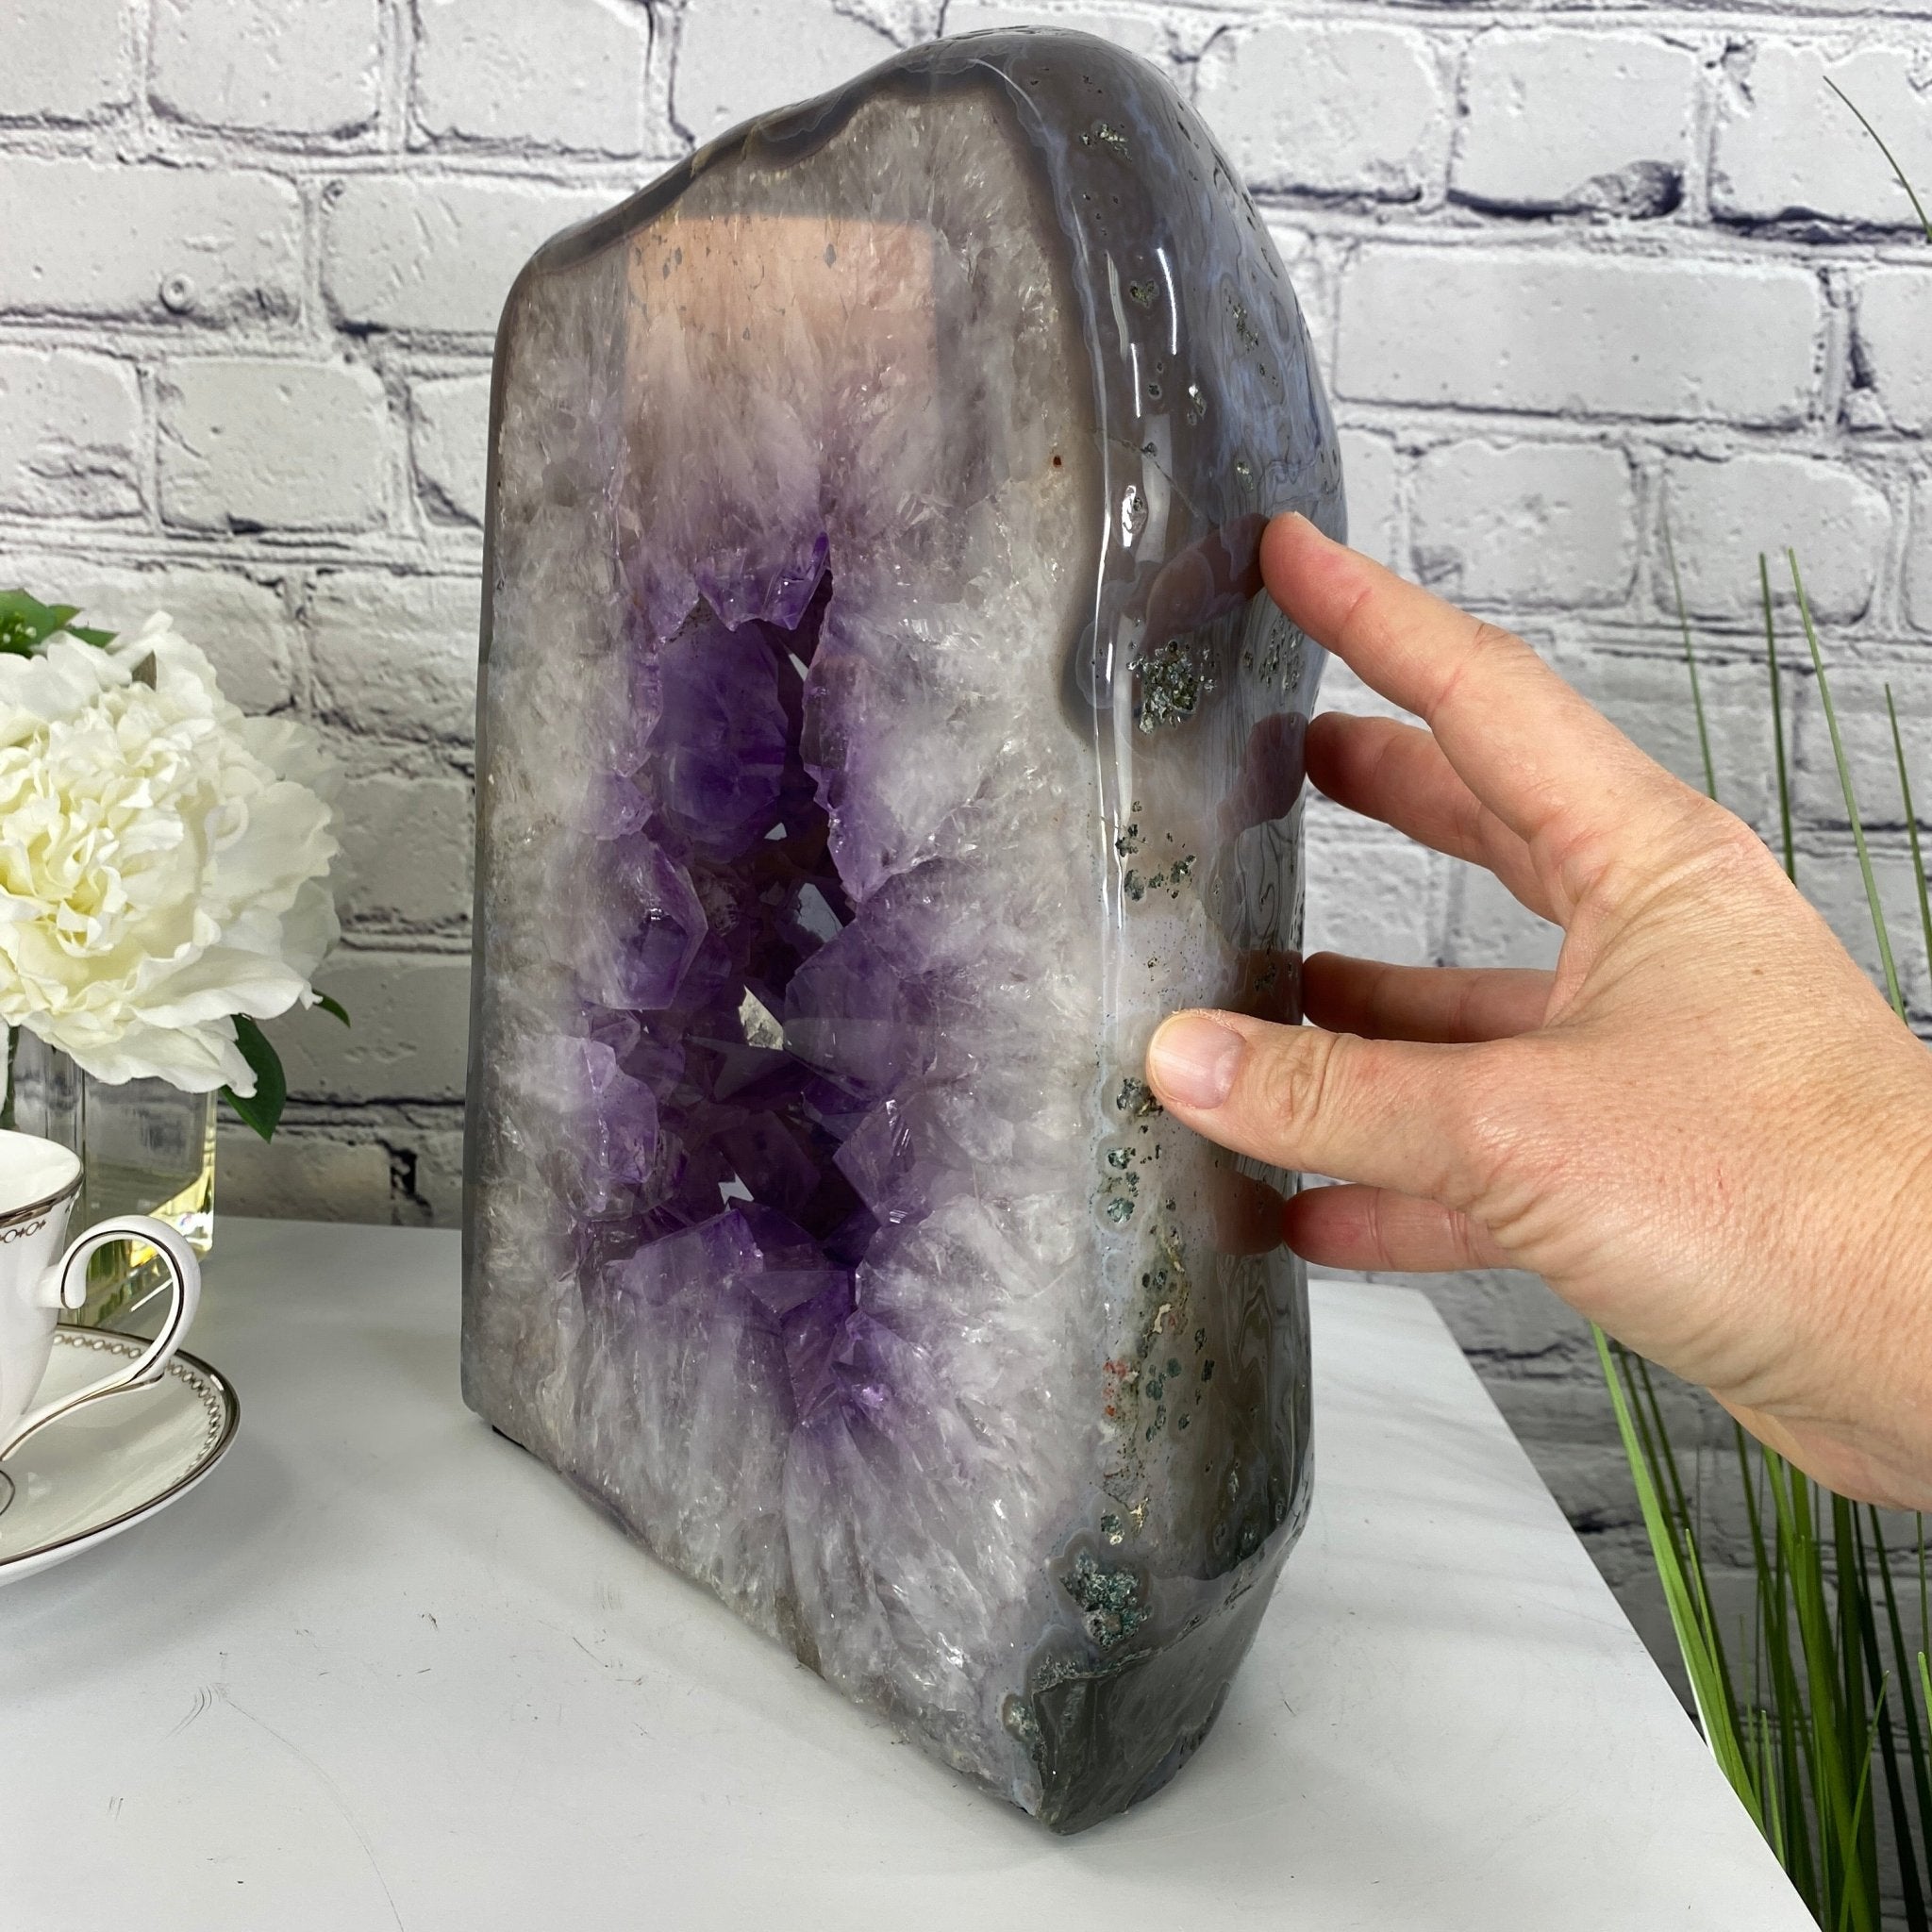 Extra Quality Polished Brazilian Amethyst Cathedral, 41.3 lbs & 12.7" tall Model #5602-0013 by Brazil Gems - Brazil GemsBrazil GemsExtra Quality Polished Brazilian Amethyst Cathedral, 41.3 lbs & 12.7" tall Model #5602-0013 by Brazil GemsPolished Cathedrals5602-0013